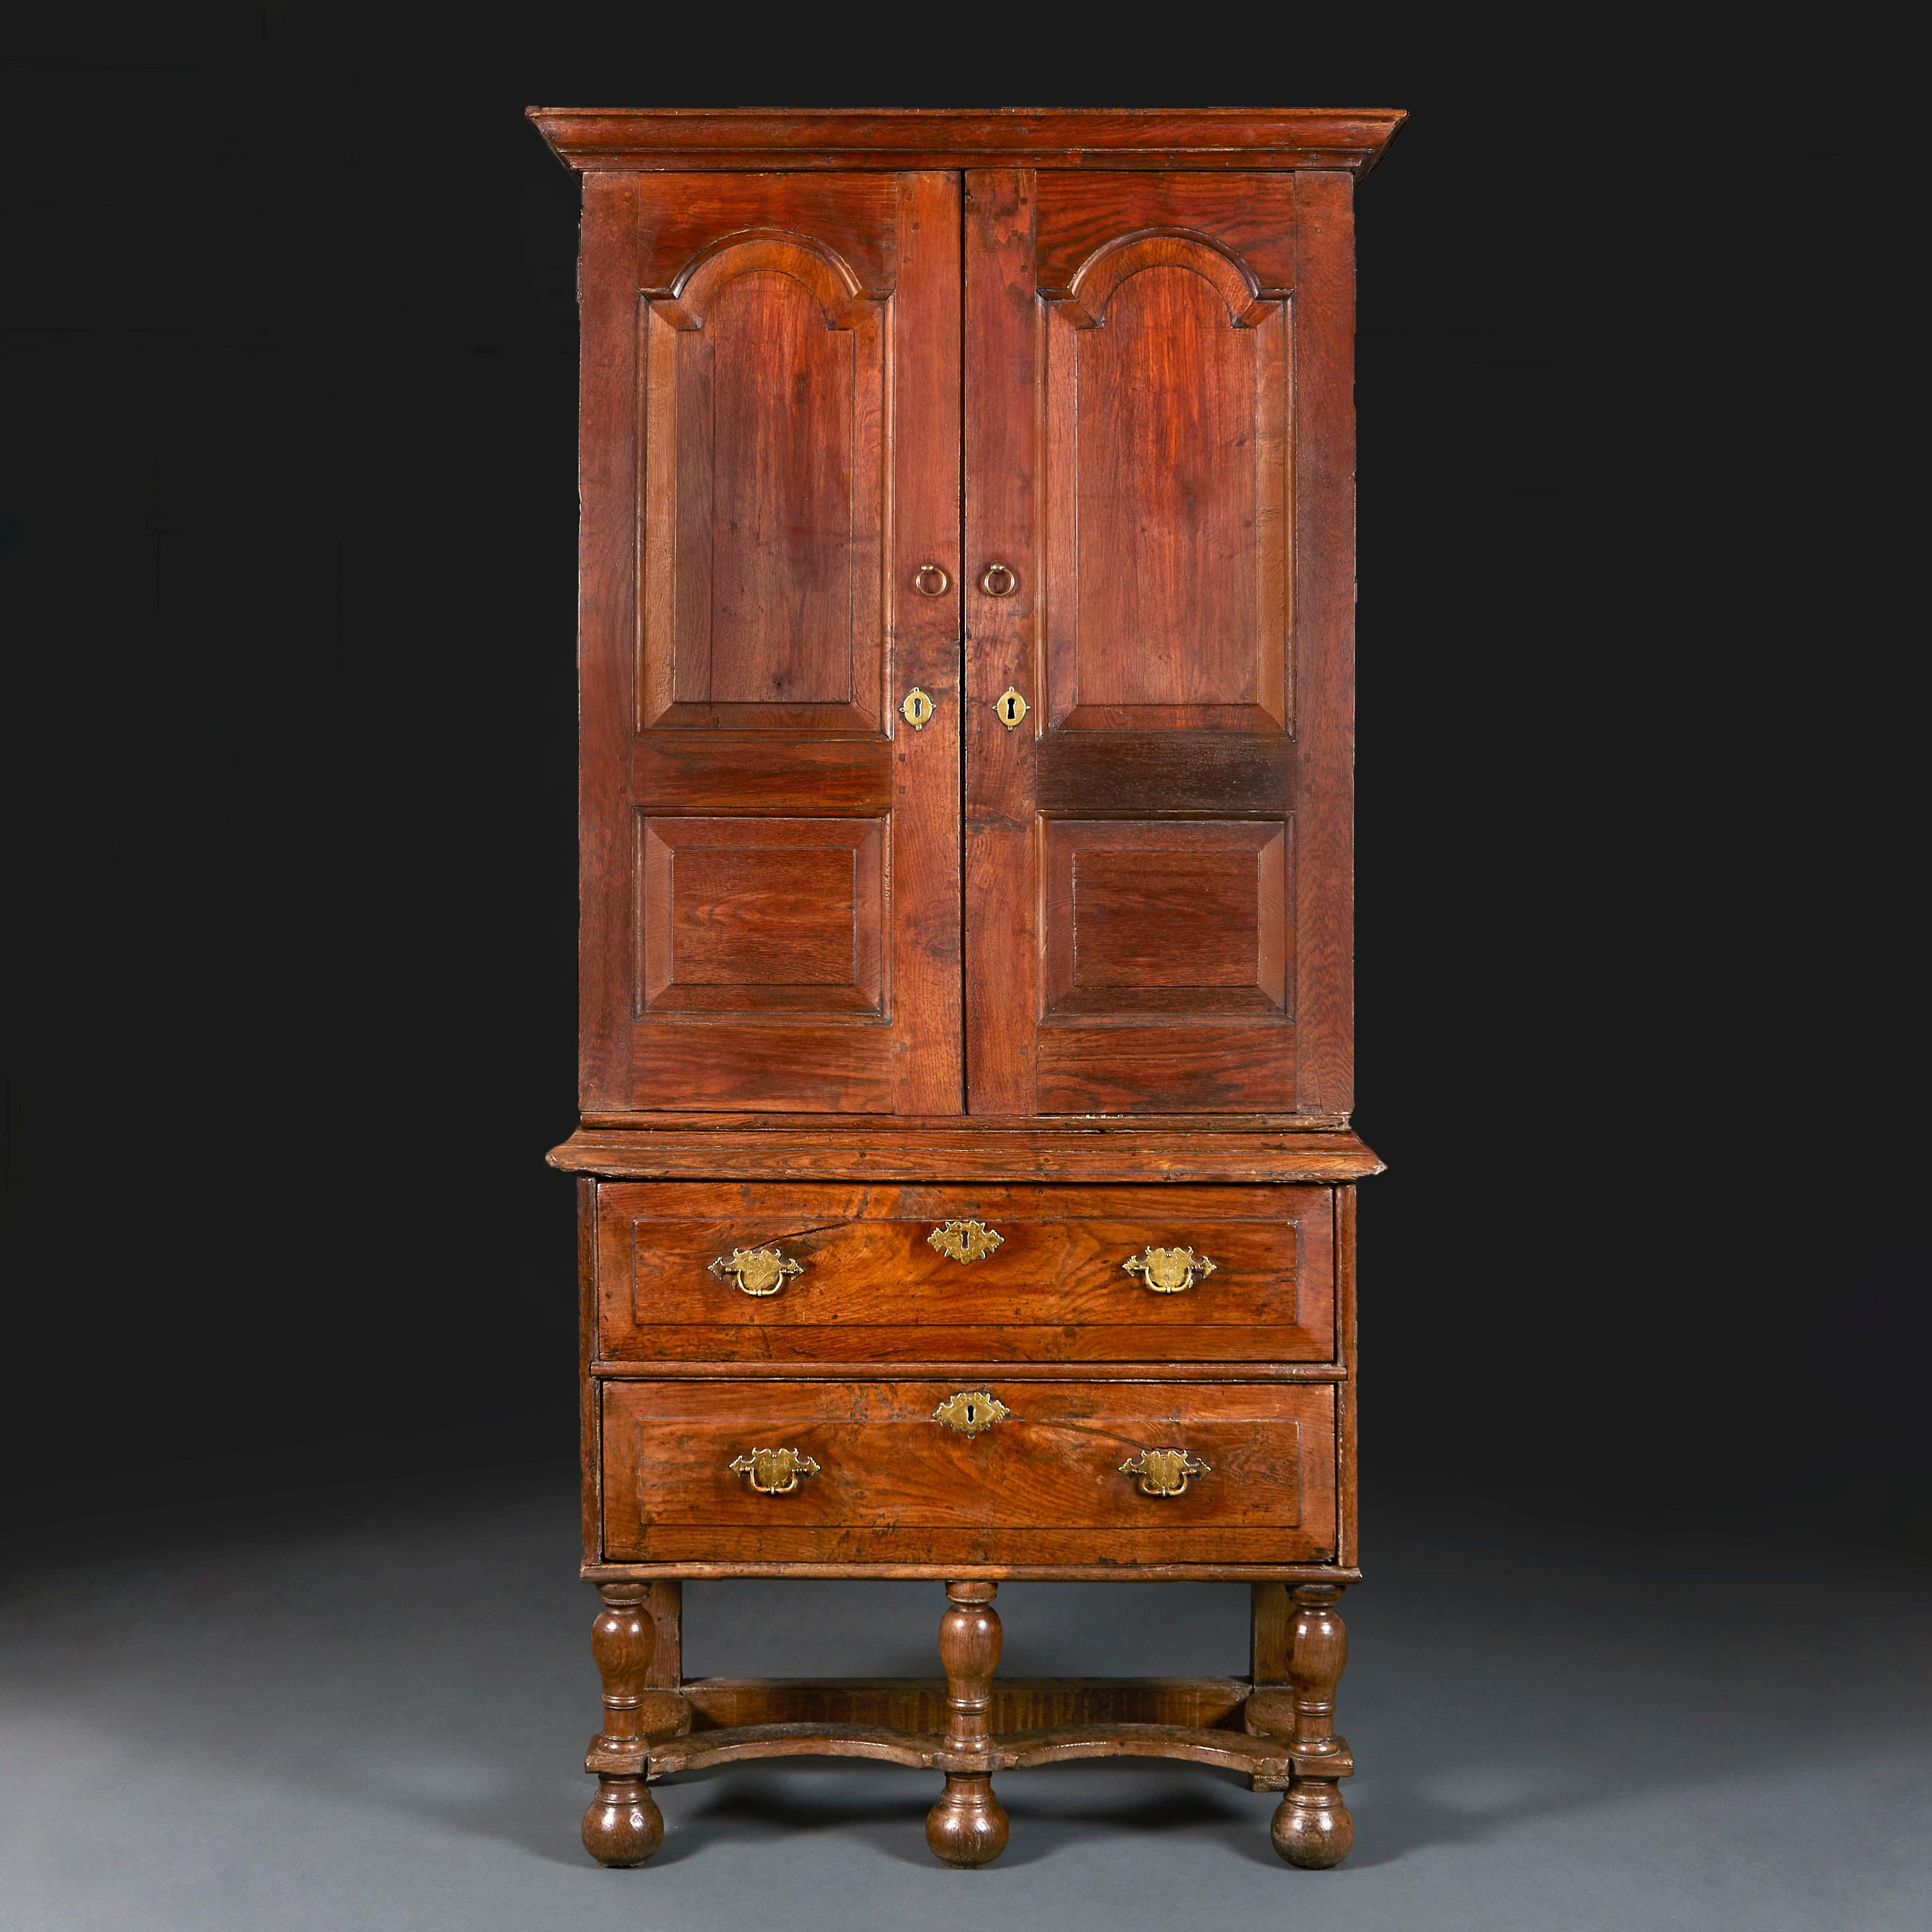 England, circa 1750

A fine mid-eighteenth century elm cabinet with two panelled doors above a secret draw, the interior fitted with shelves and pigeonholes with two draws, all supported on a stand with cross-stretcher.

Height 197.00cm
Width